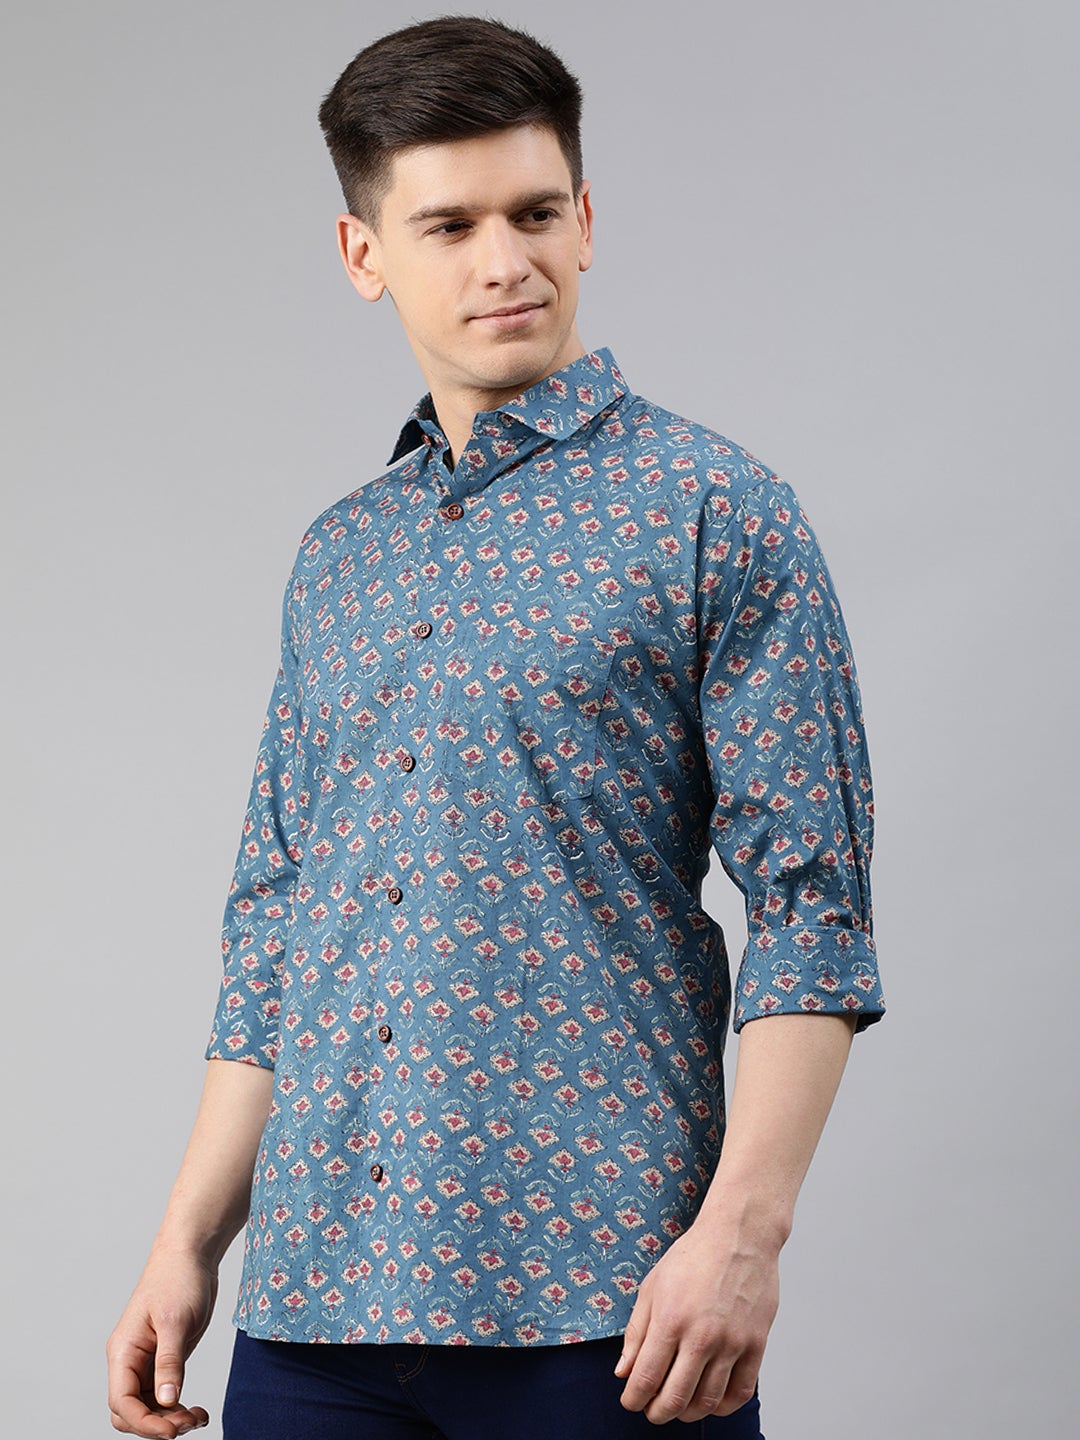 Blue Cotton Full Sleeves Shirts For Men